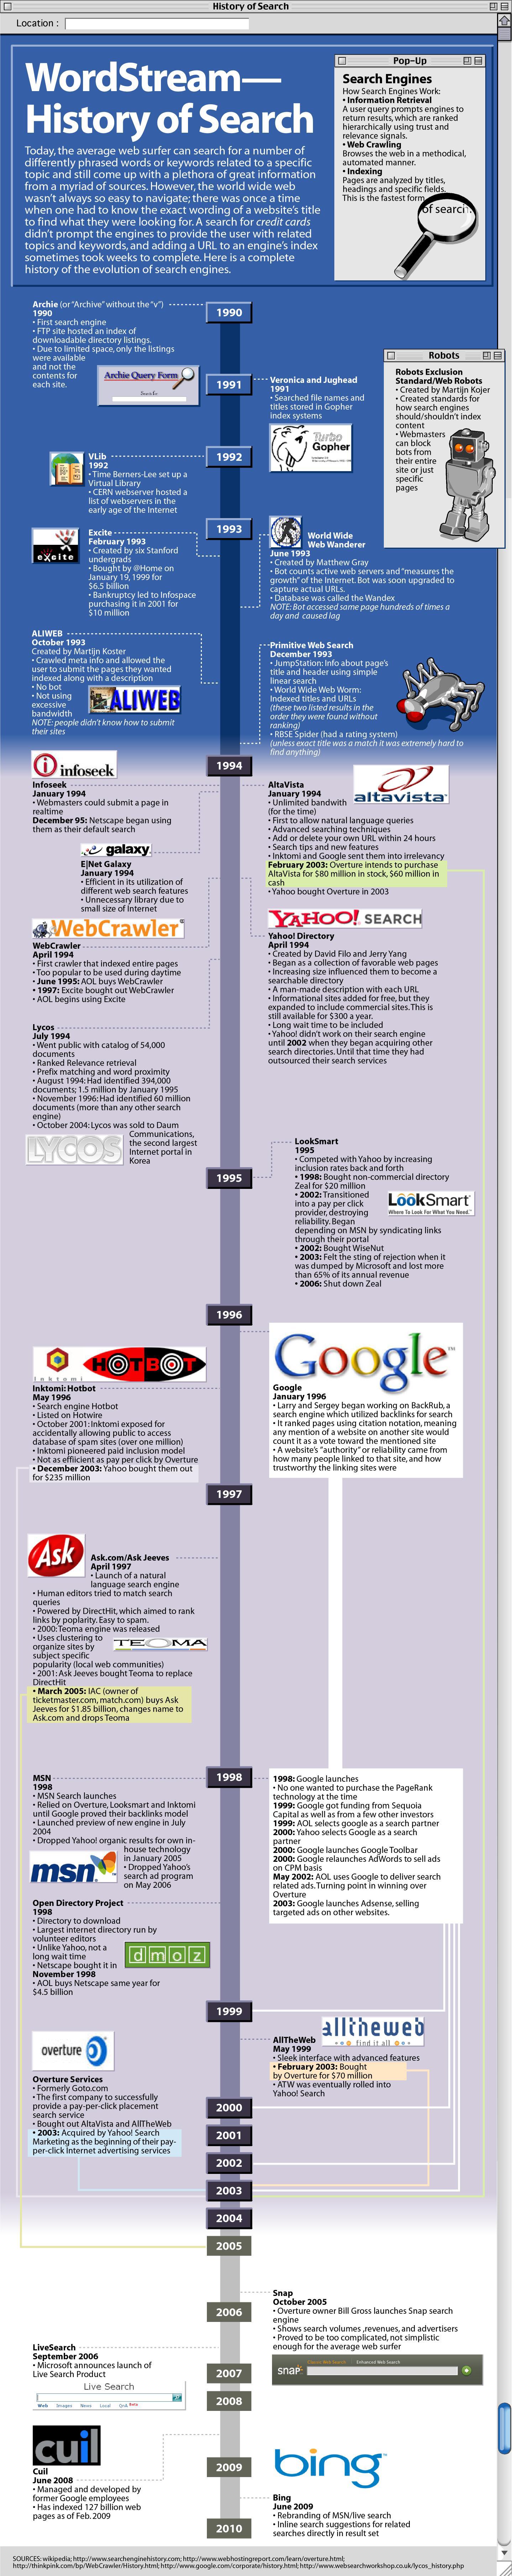 Internet-search-engines